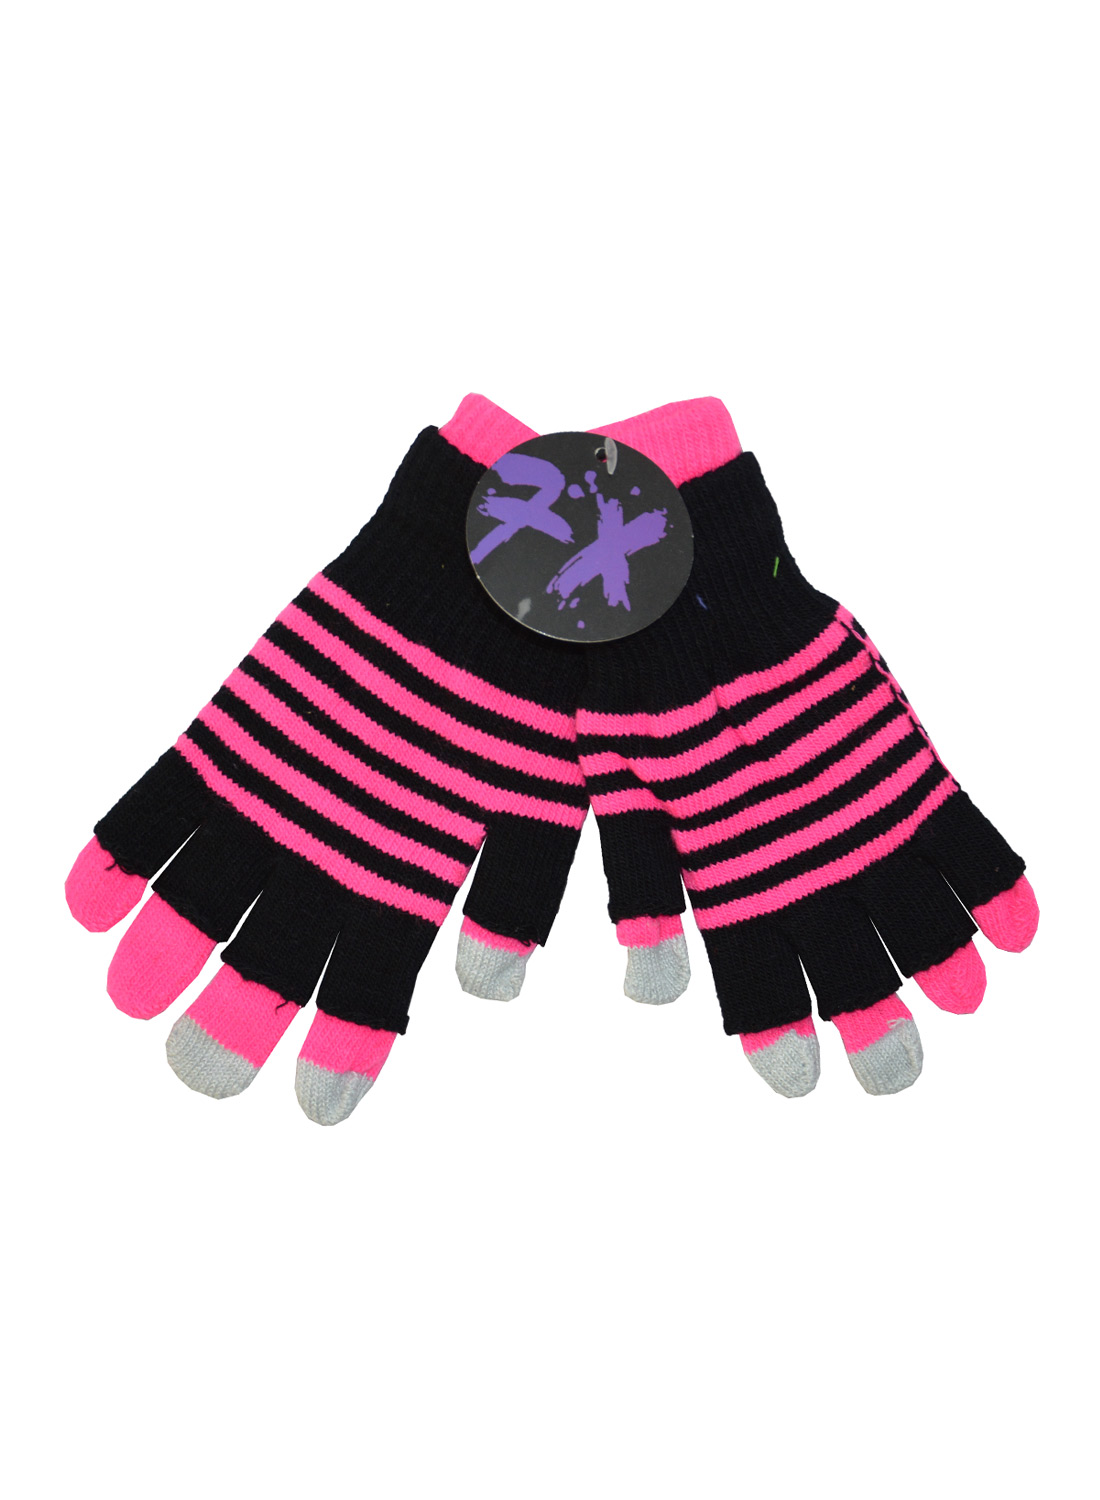 Double Black & Neon Pink Striped Gloves